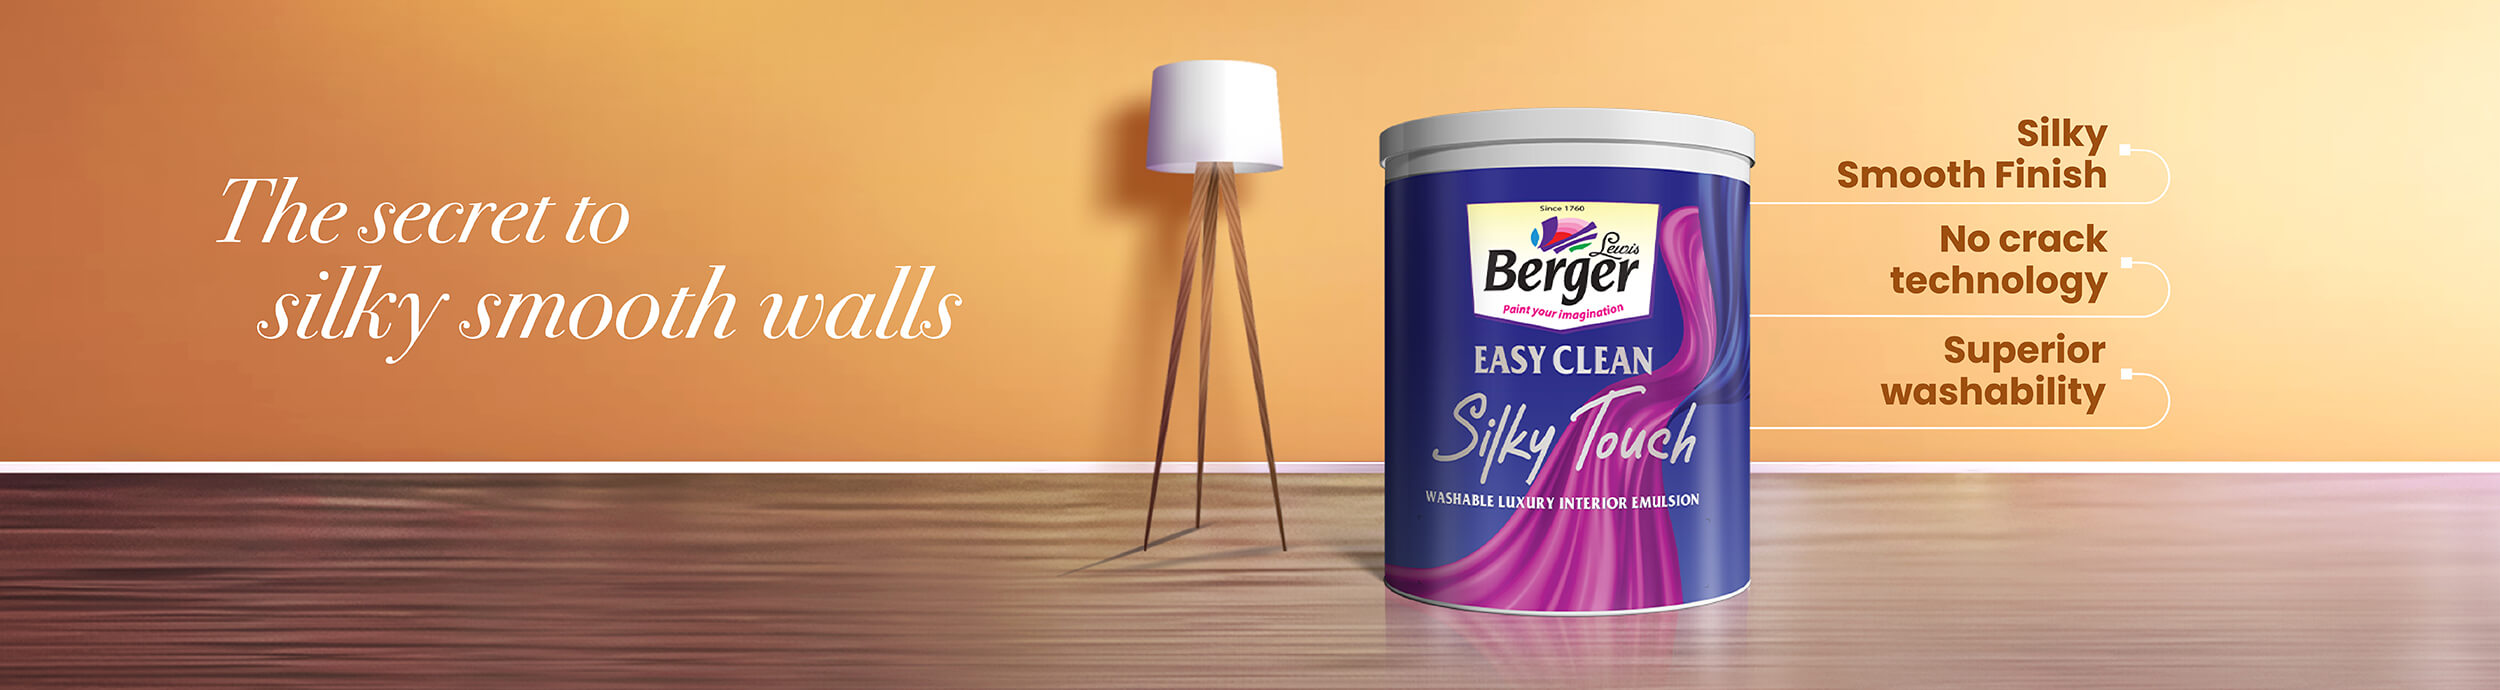 Easy Clean Silky Touch Banner